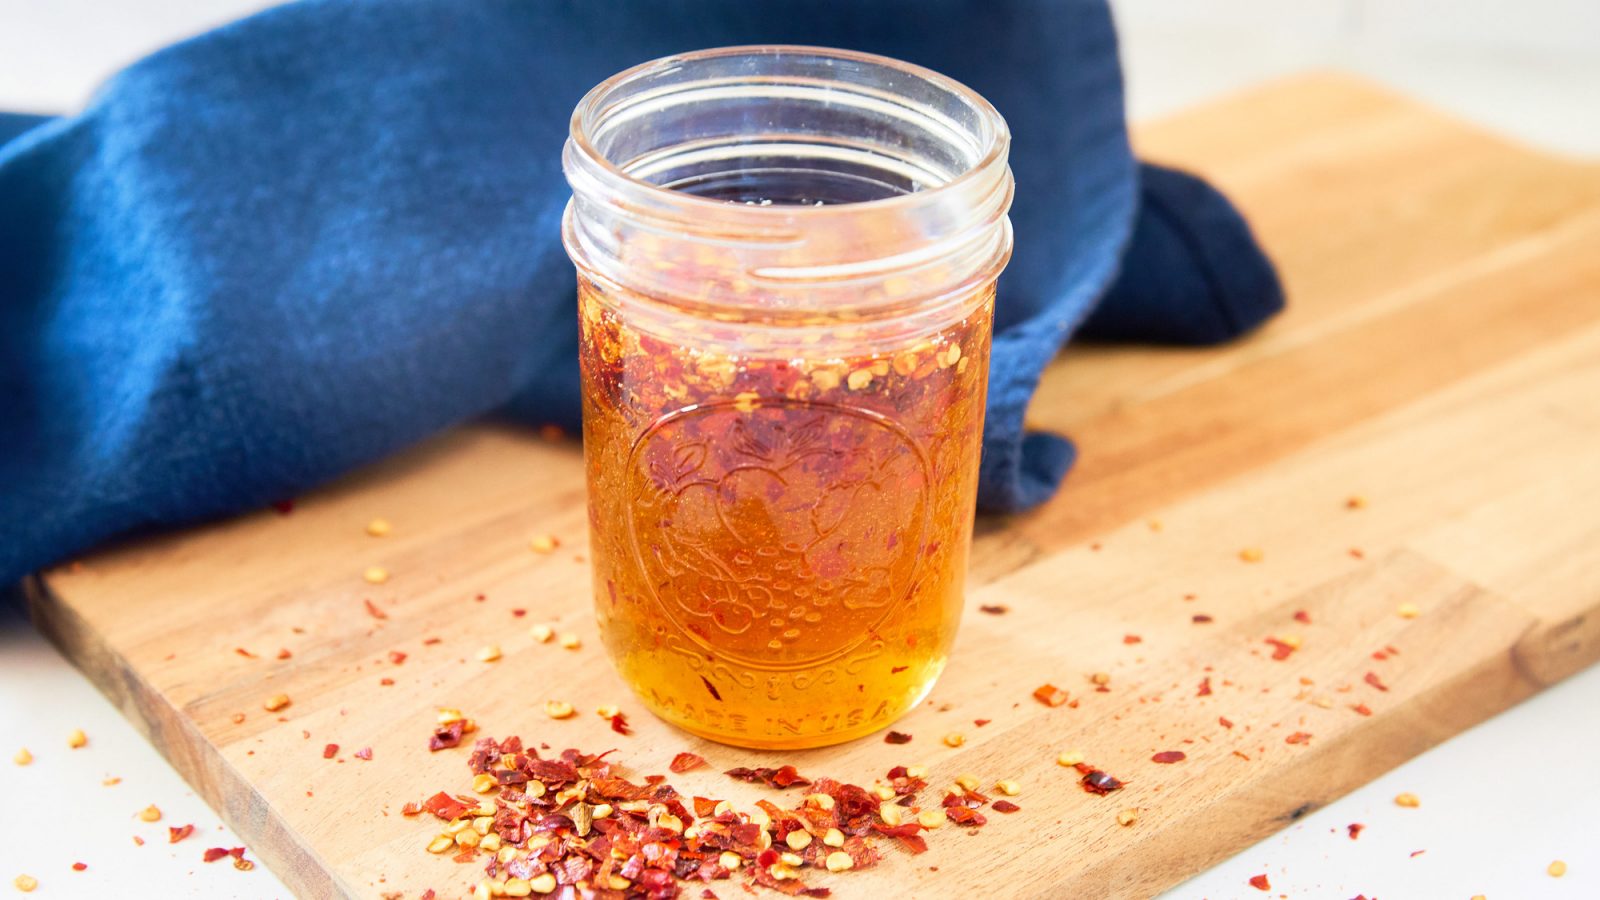 jar filled with a hot honey recipe on cutting board with red pepper flakes